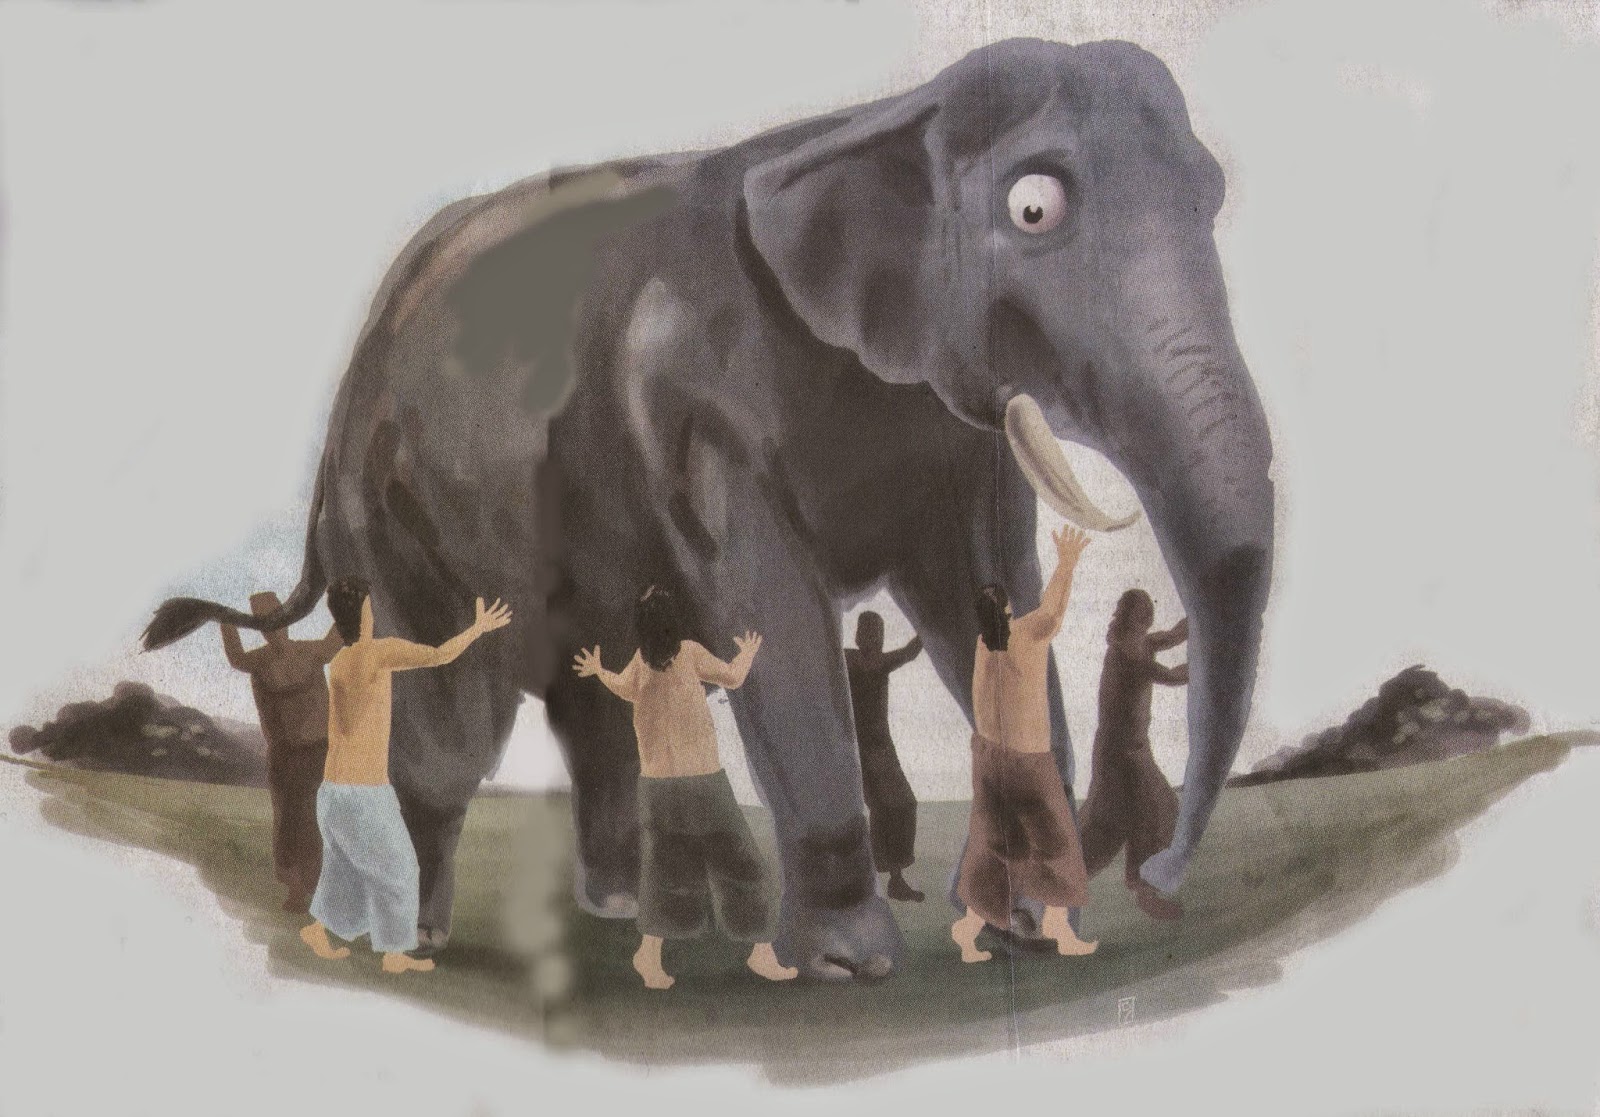 The Six Blind Men And An Elephant Folklore From India Jendela Informasi